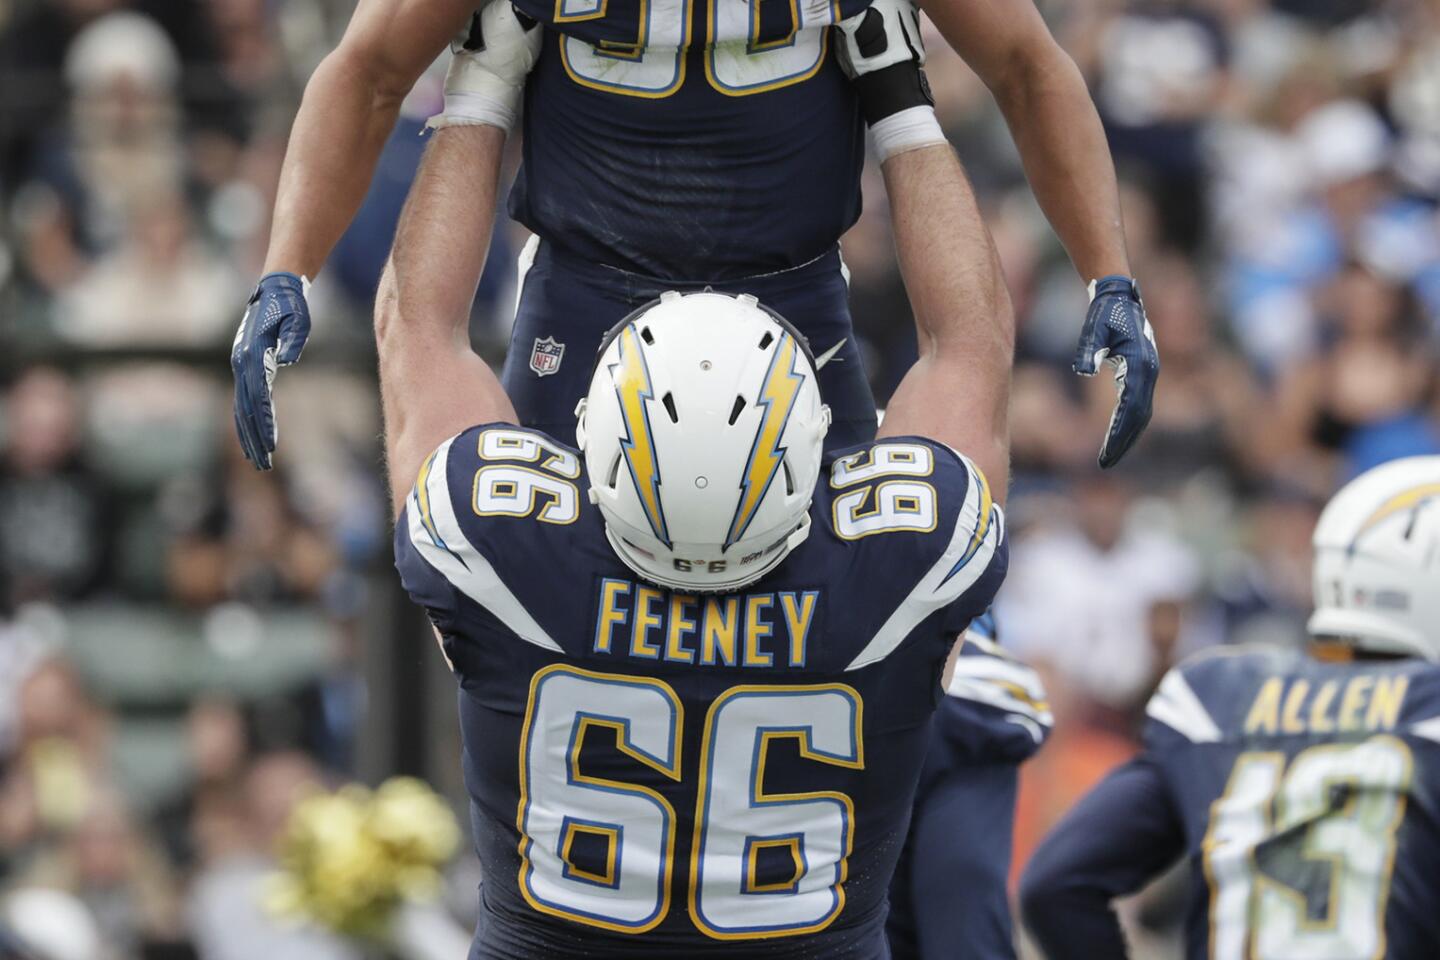 Chargers running back Austin Ekeler is lifted by offensive lineman Dan Feeney after Ekeler scored during the second quarter.